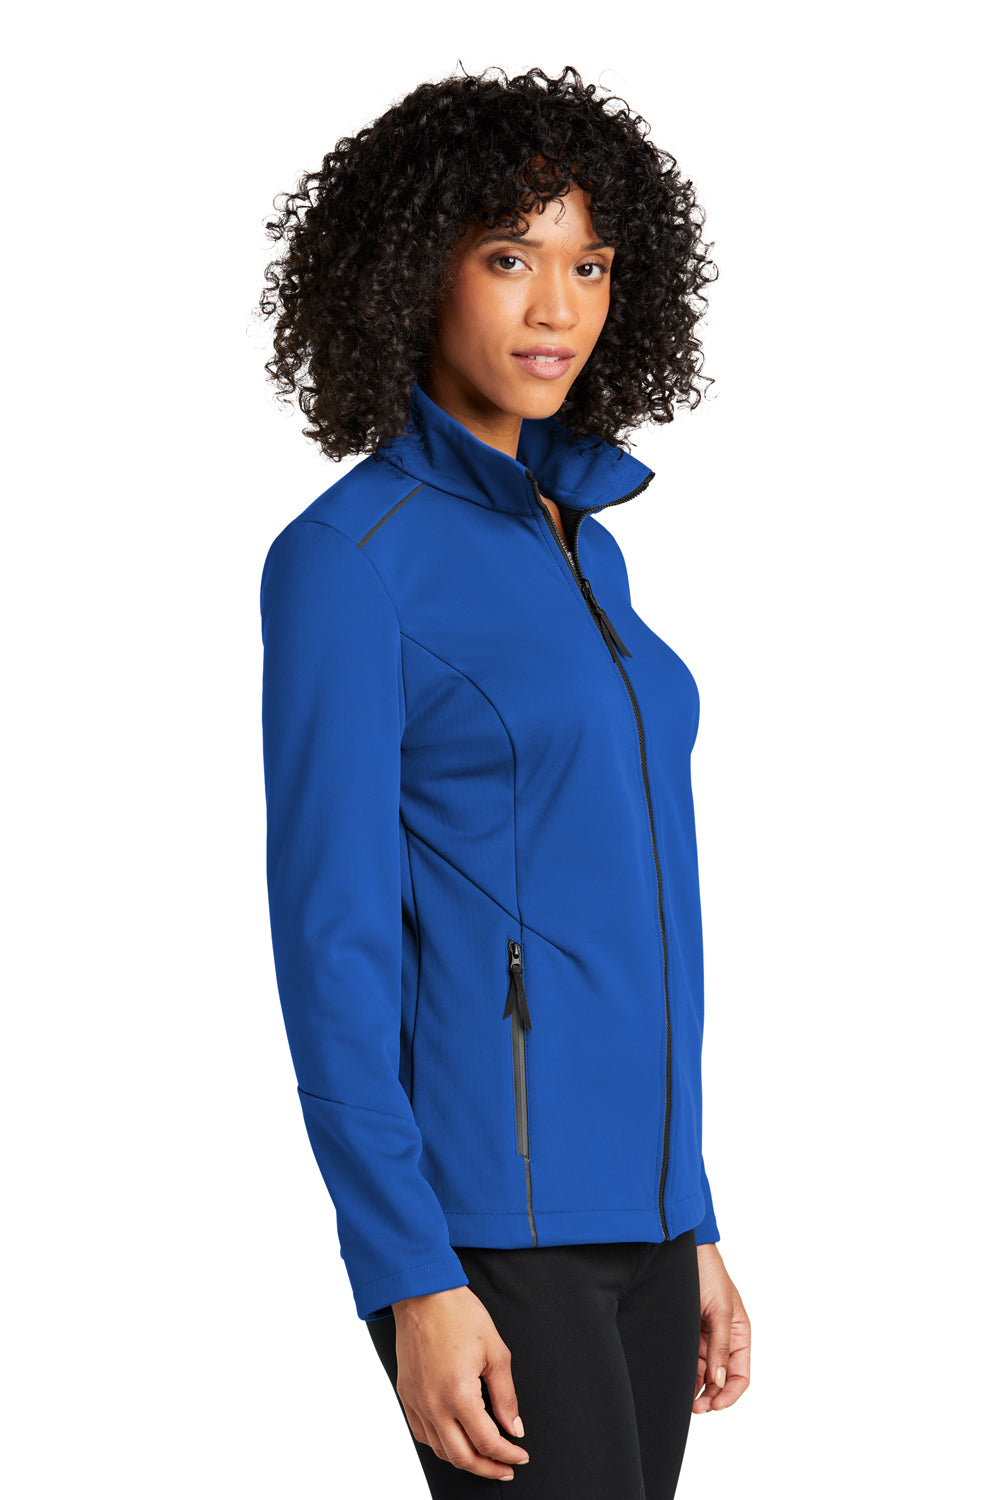 Port Authority L921 Collective Tech Full Zip Soft Shell Jacket True Royal Blue 3Q